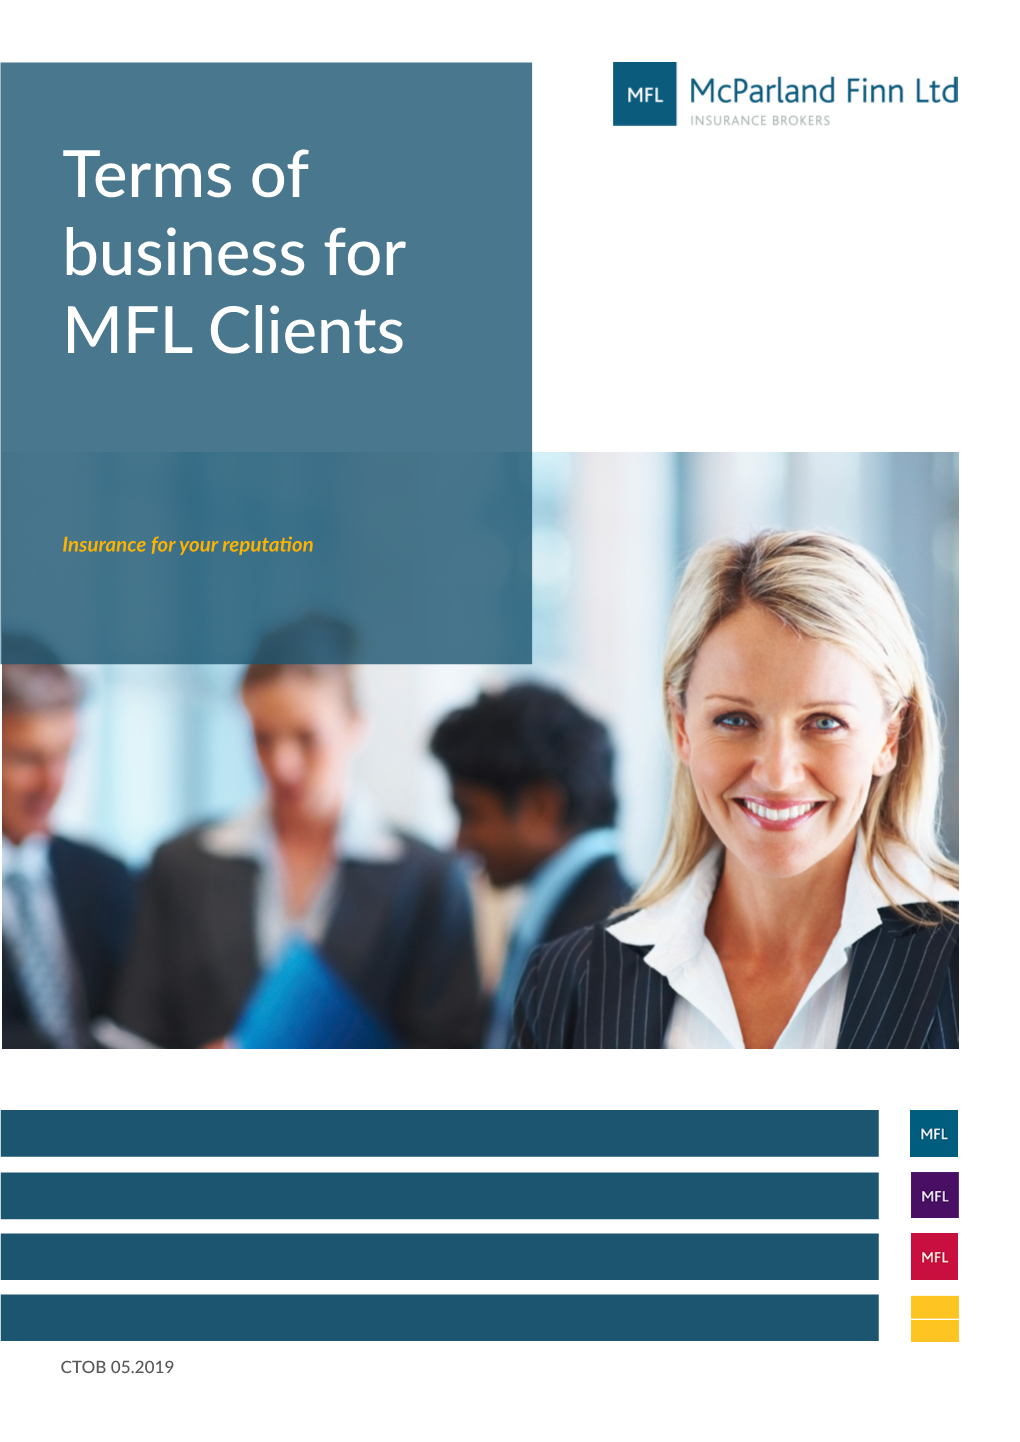 Terms of Business for MFL Clients